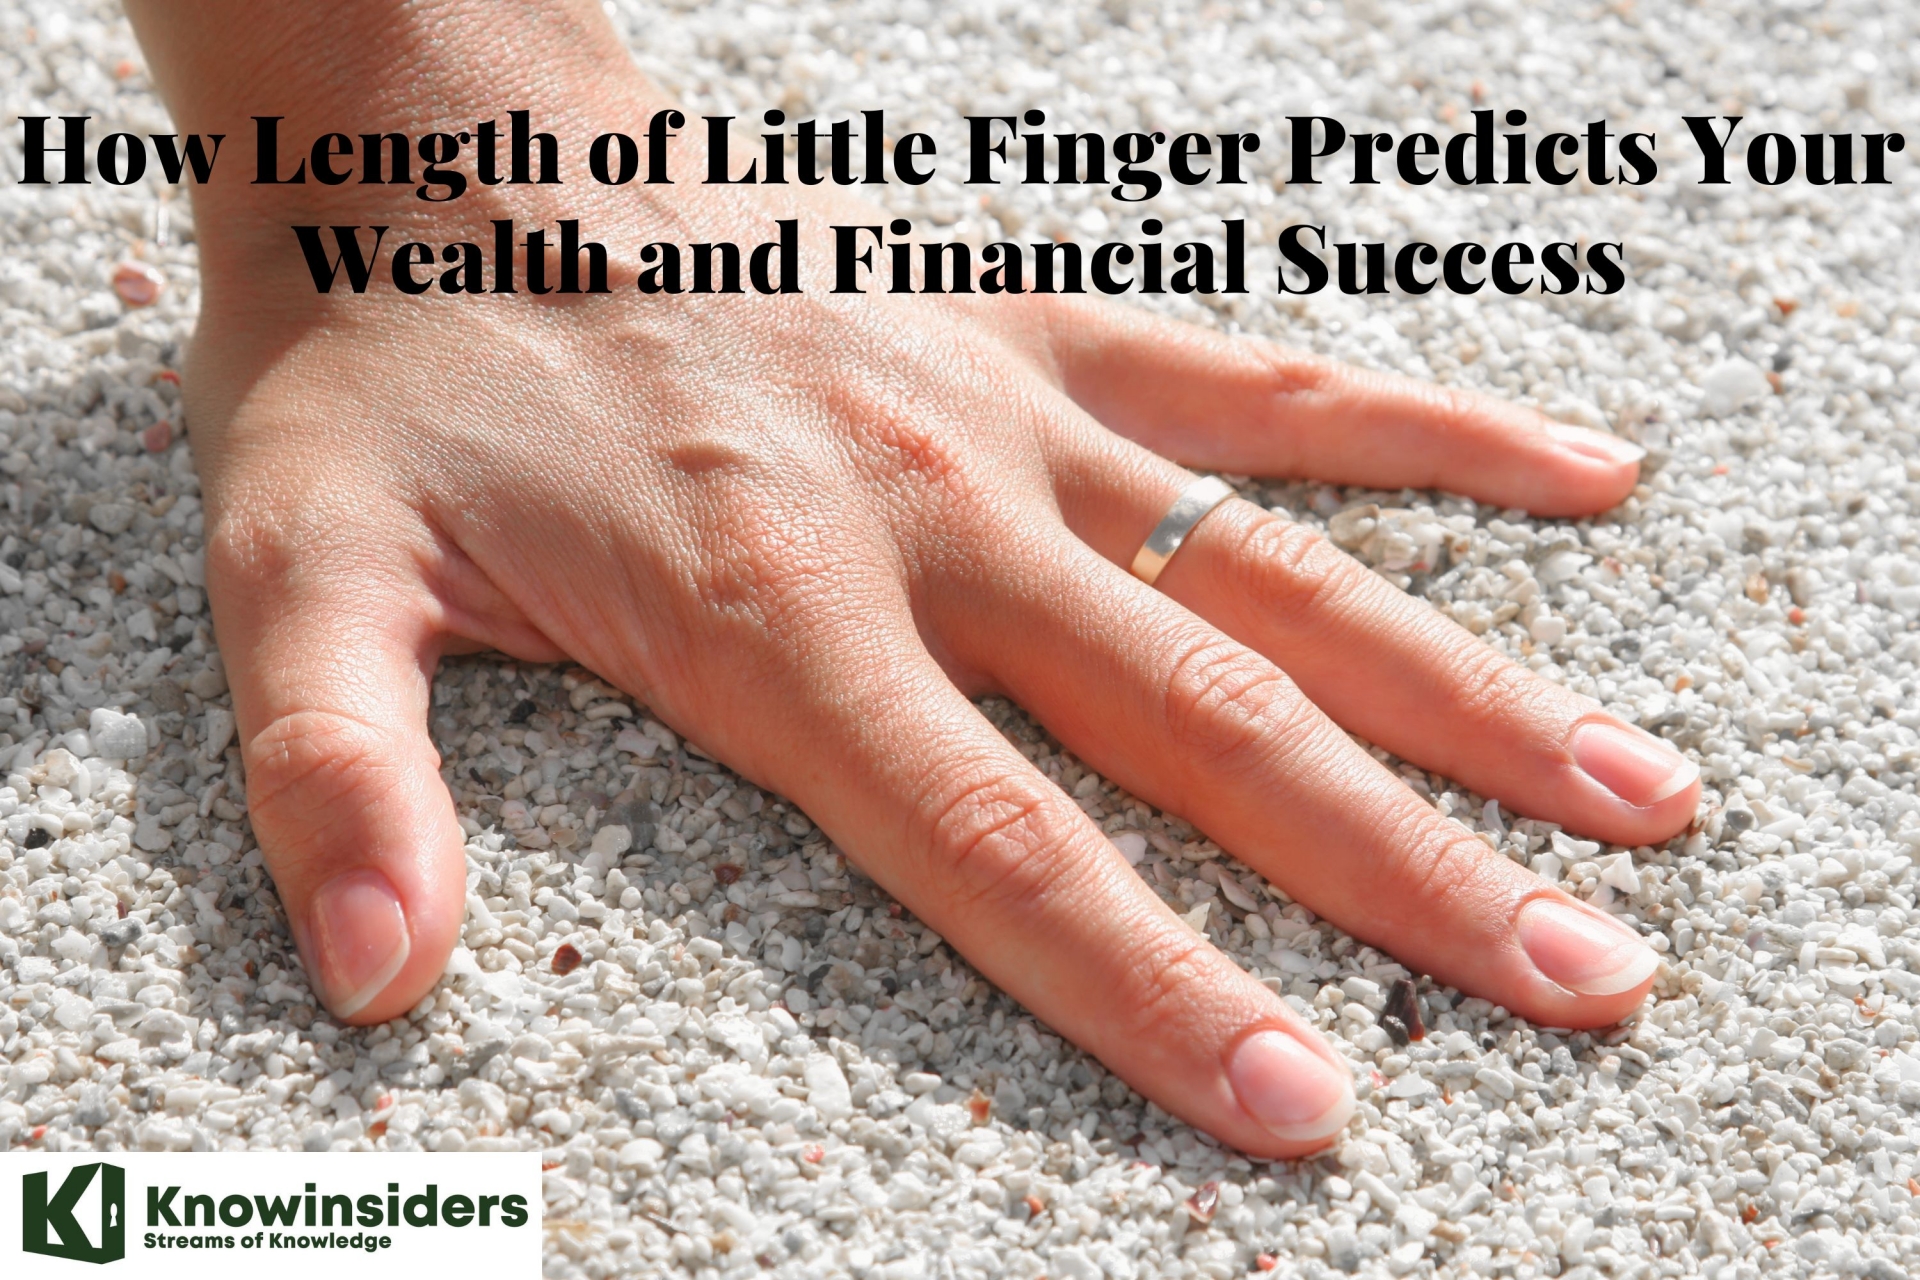 How Length of Little Finger Predicts Your Wealth and Financial Success